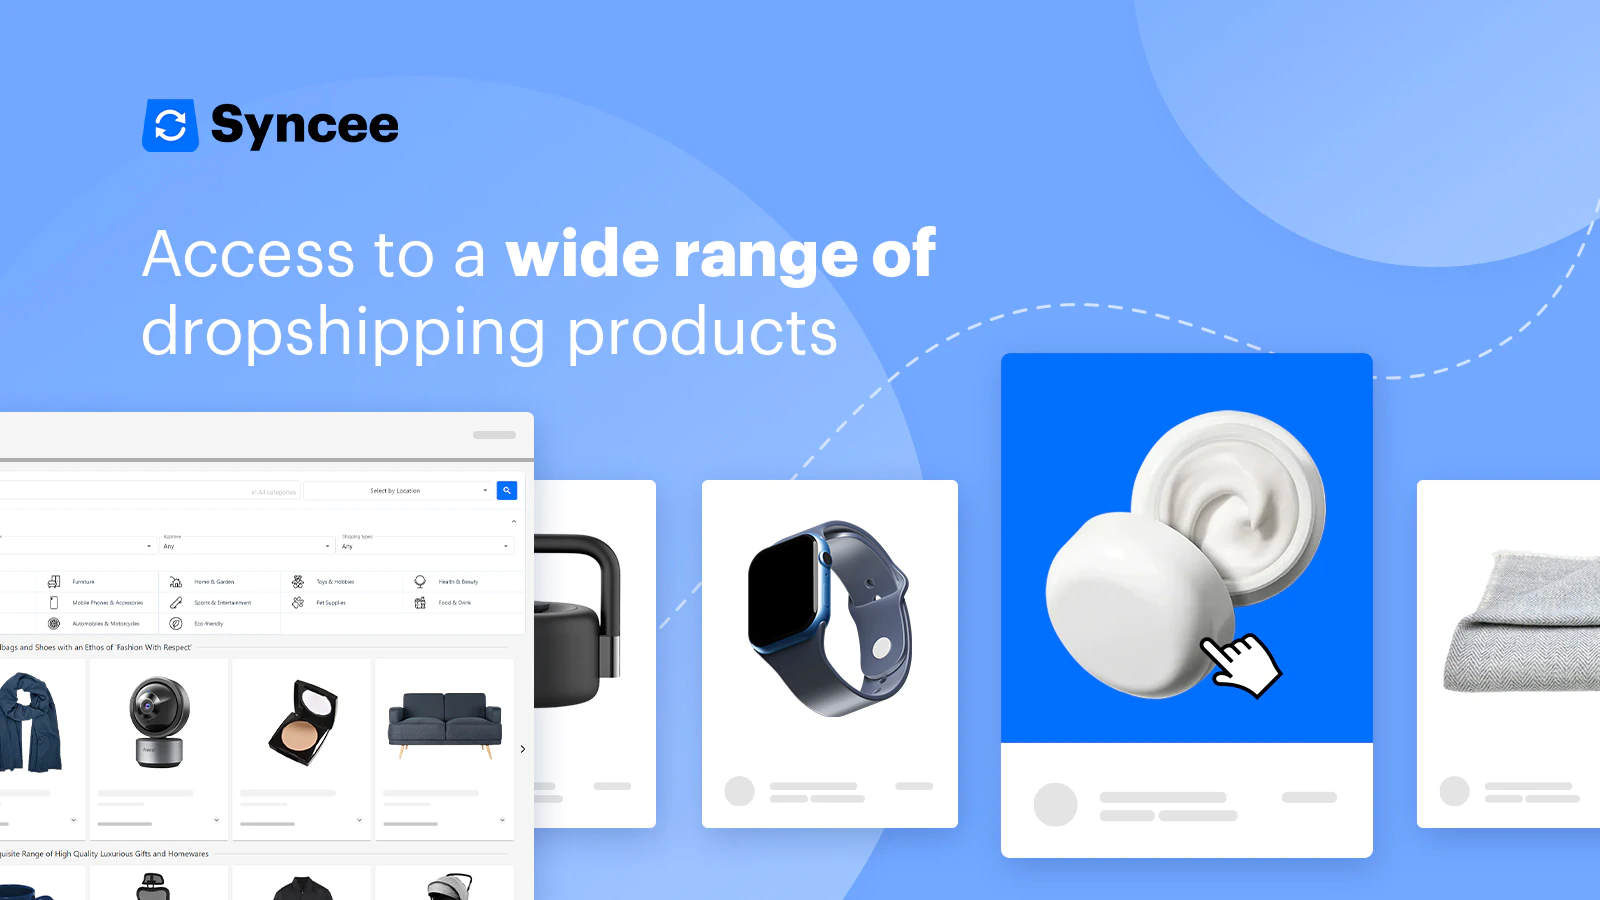 Collage of product images including a smartwatch, cosmetic cream, and sofa.